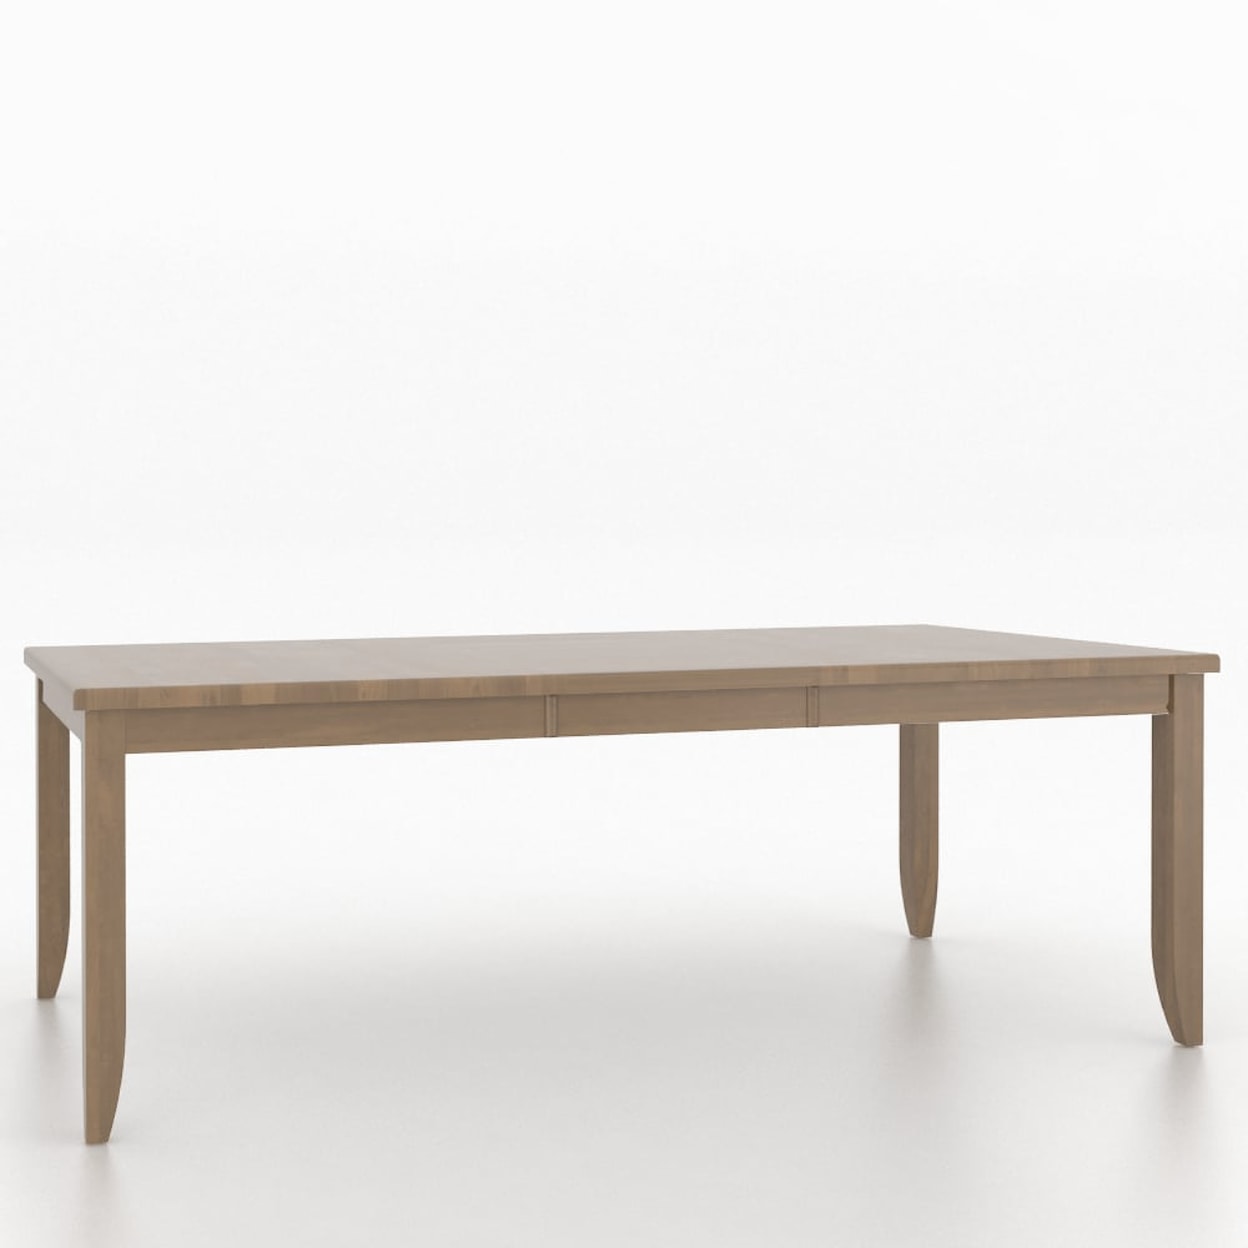 Canadel Canadel Core Customizable Dining Table